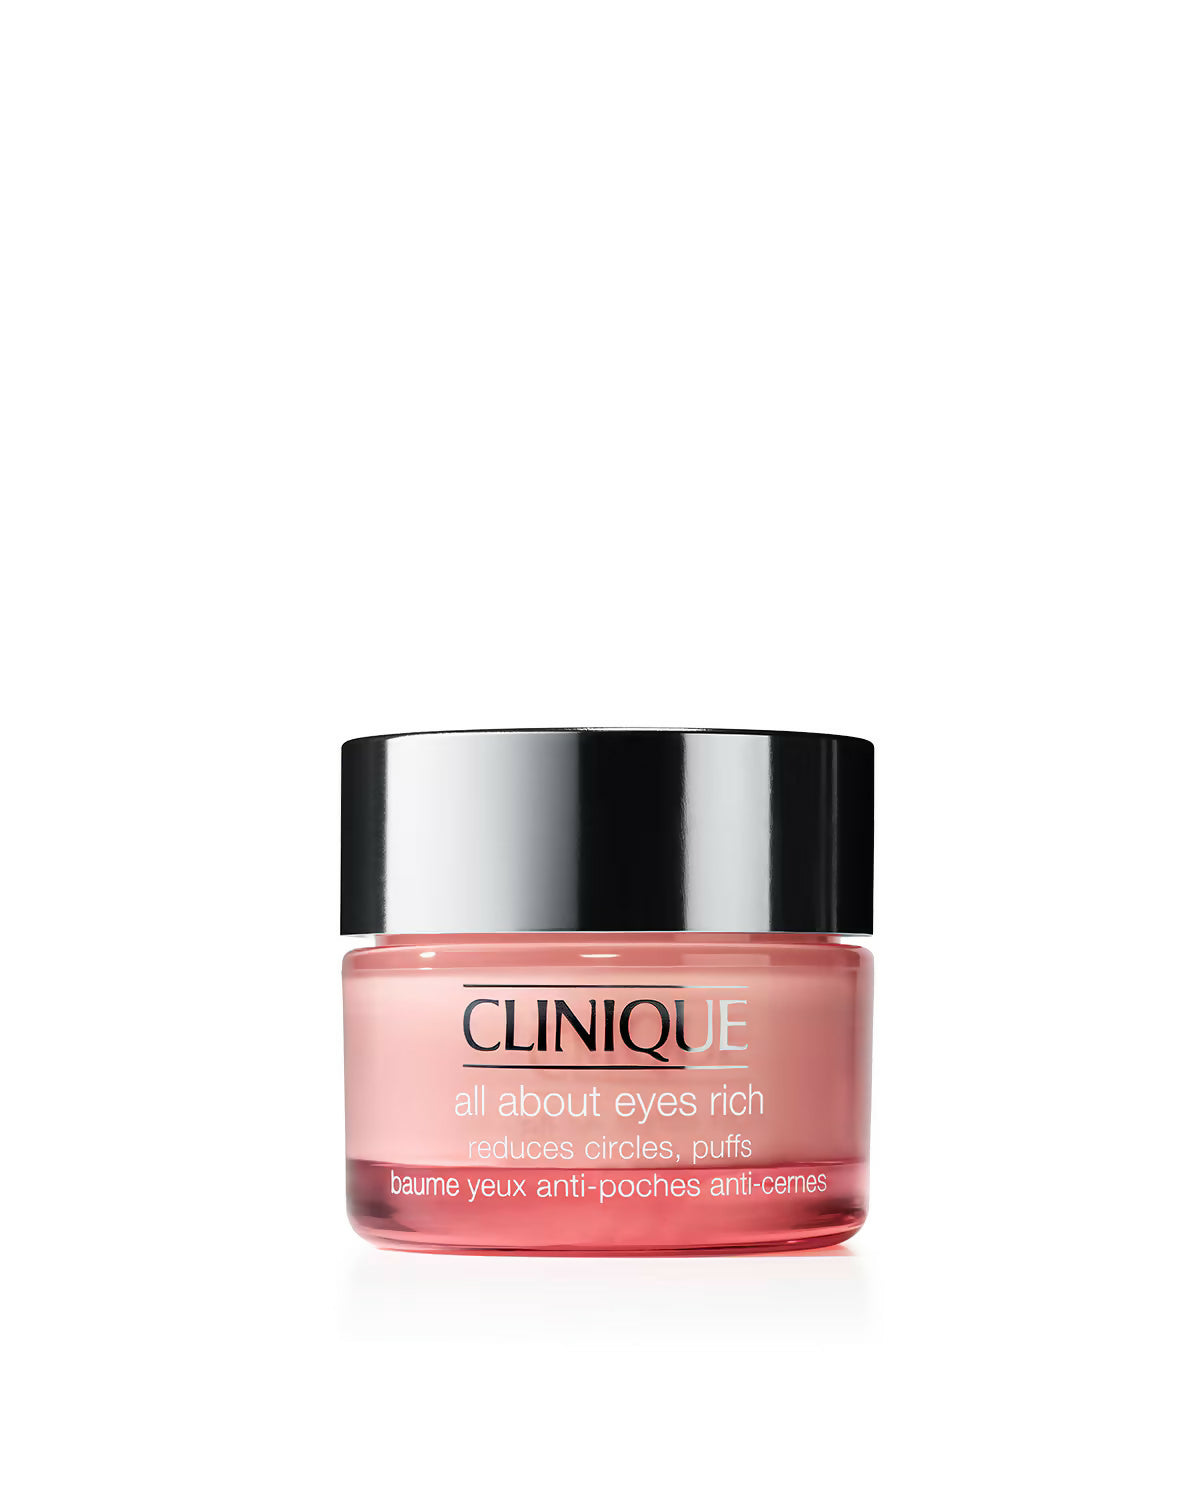 Clinique All About Eyes Rich Eye Cream with Hyaluronic Acid, 1 oz / 30ml